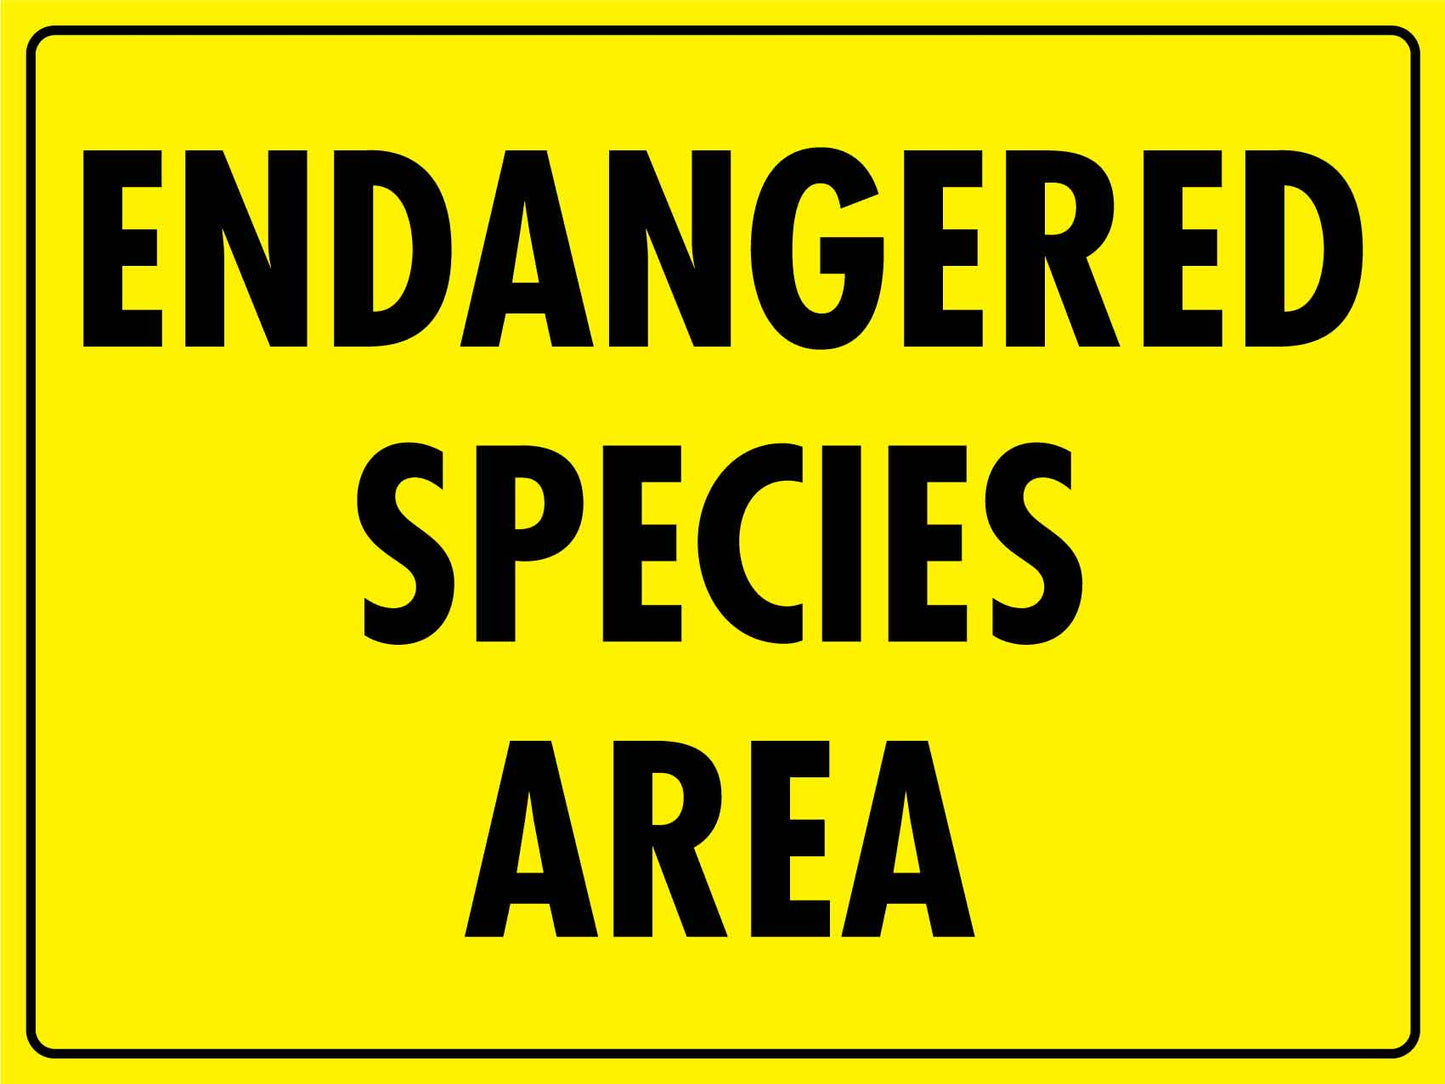 Endangered Species Area Bright Yellow Sign